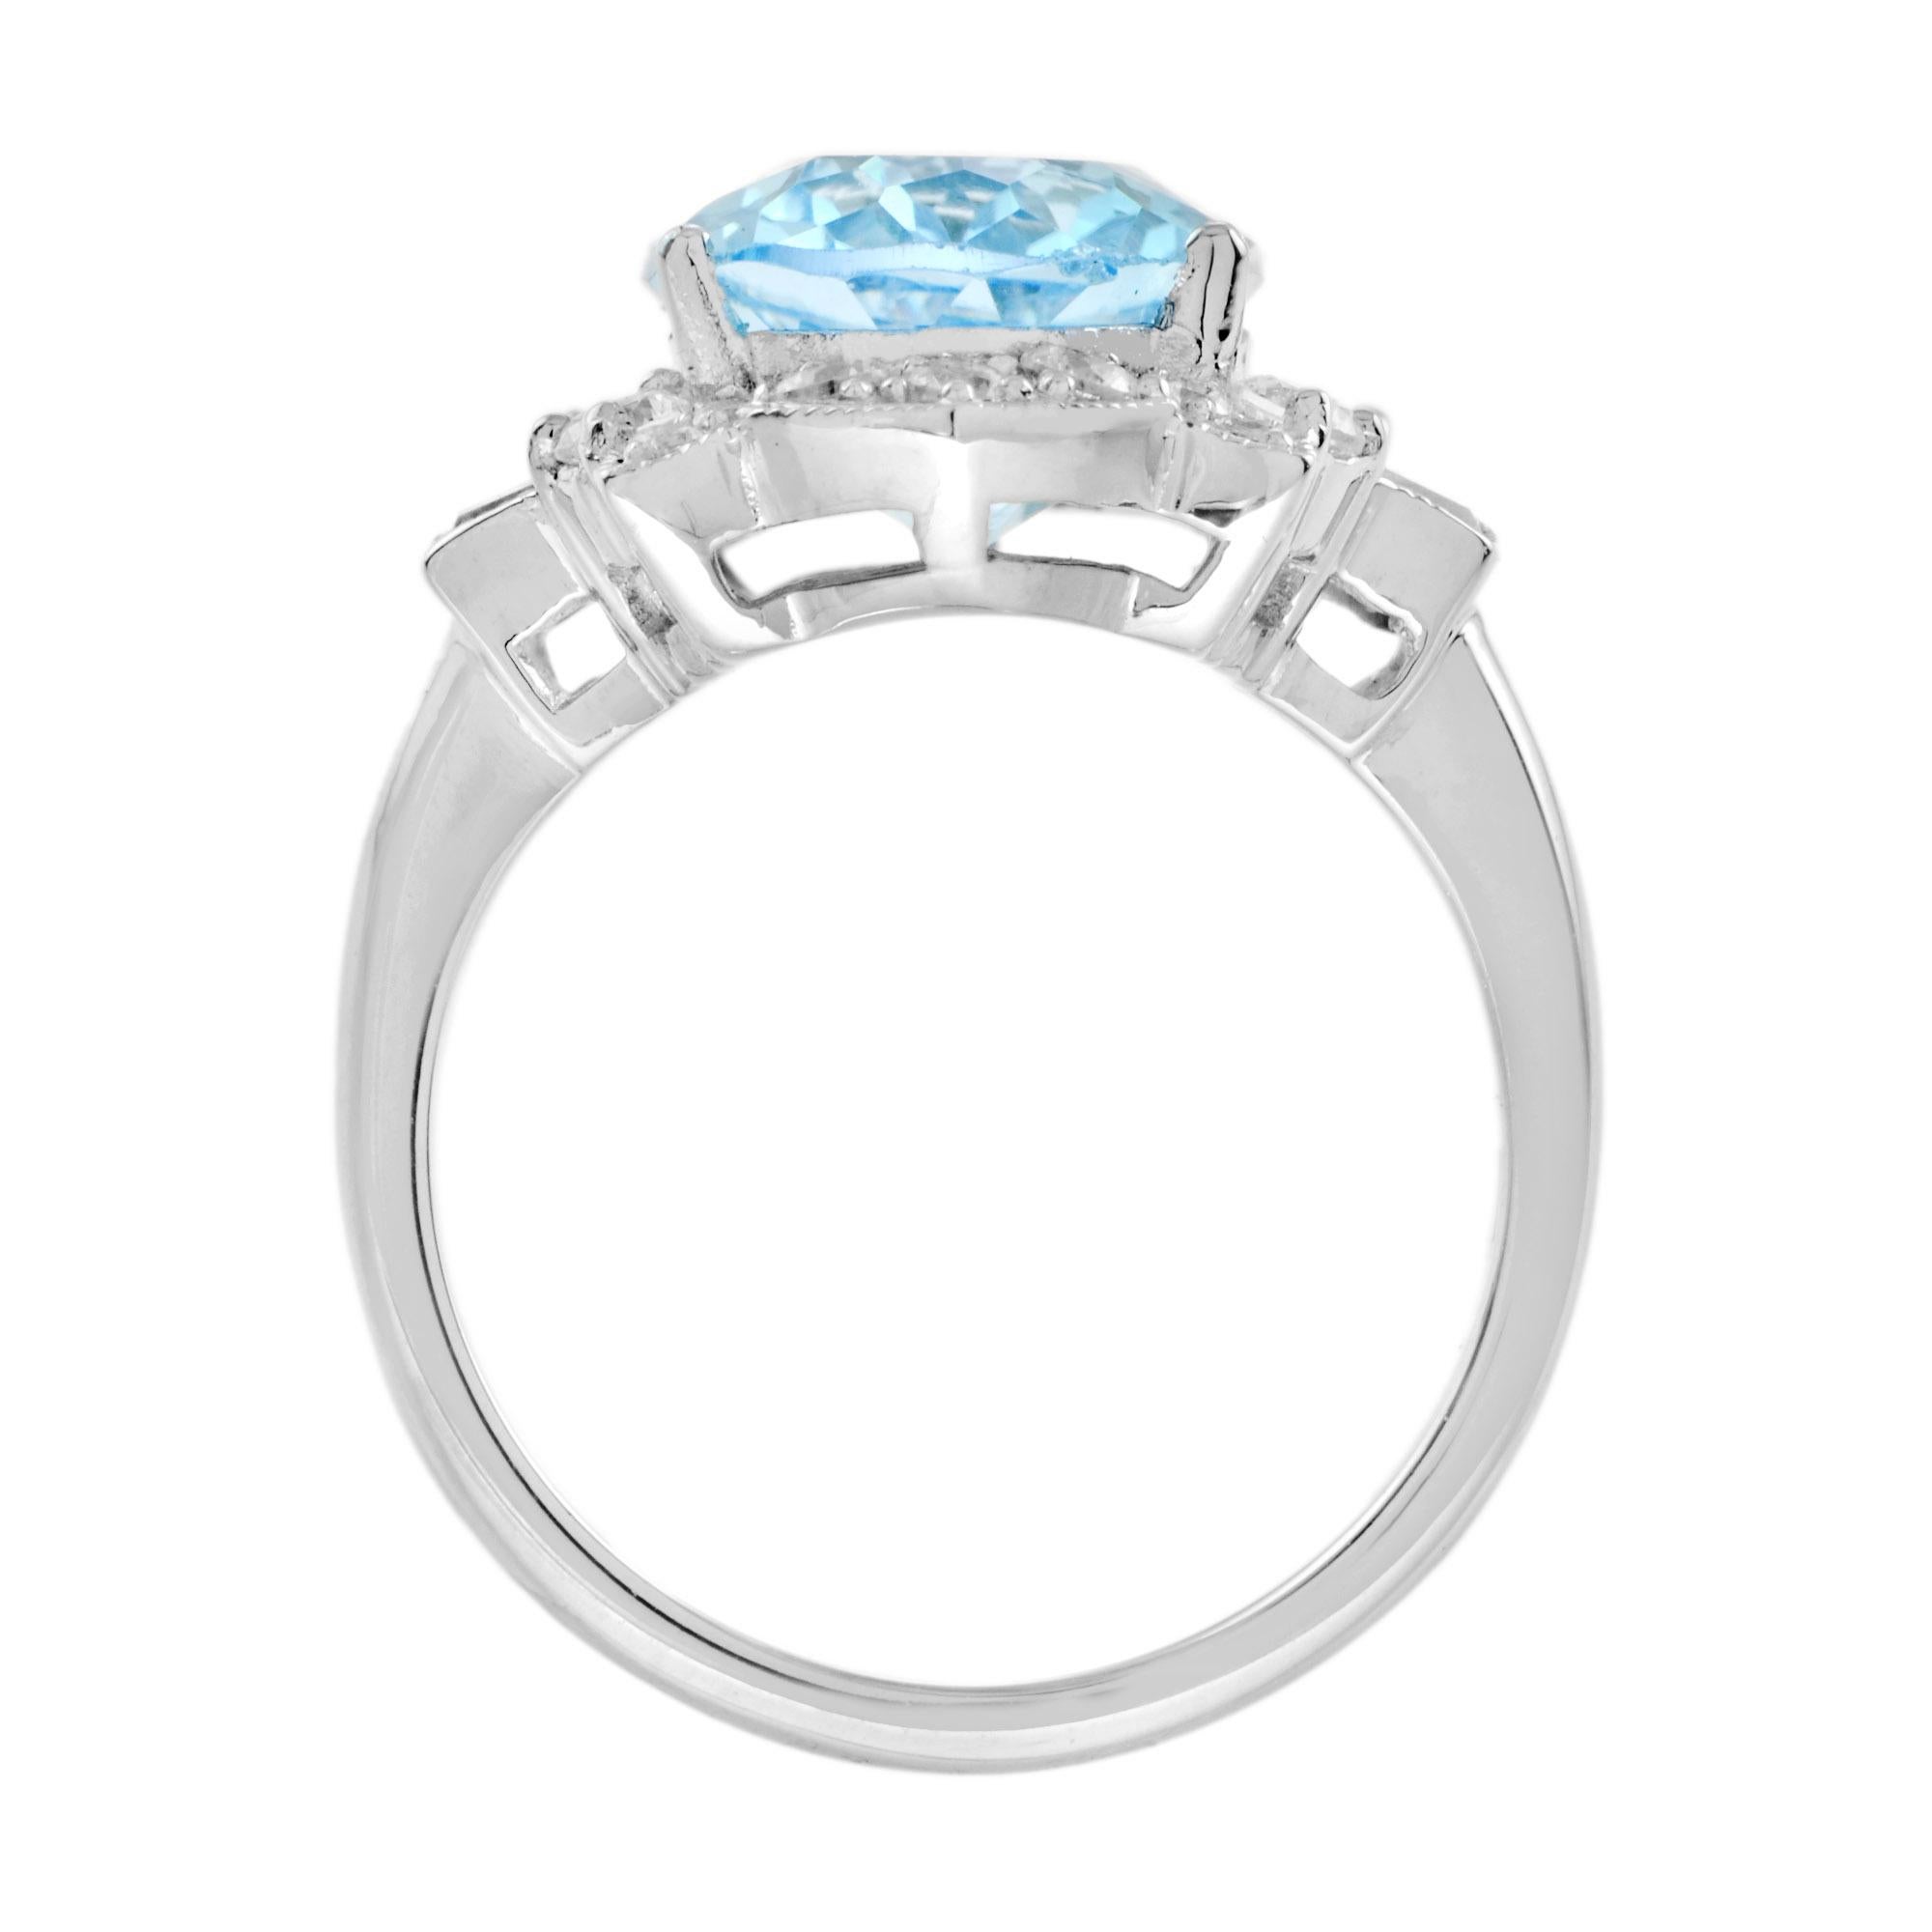 For Sale:  7.25 Ct. Oval Blue Topaz and Diamond Cocktail Ring in 18K White Gold 5